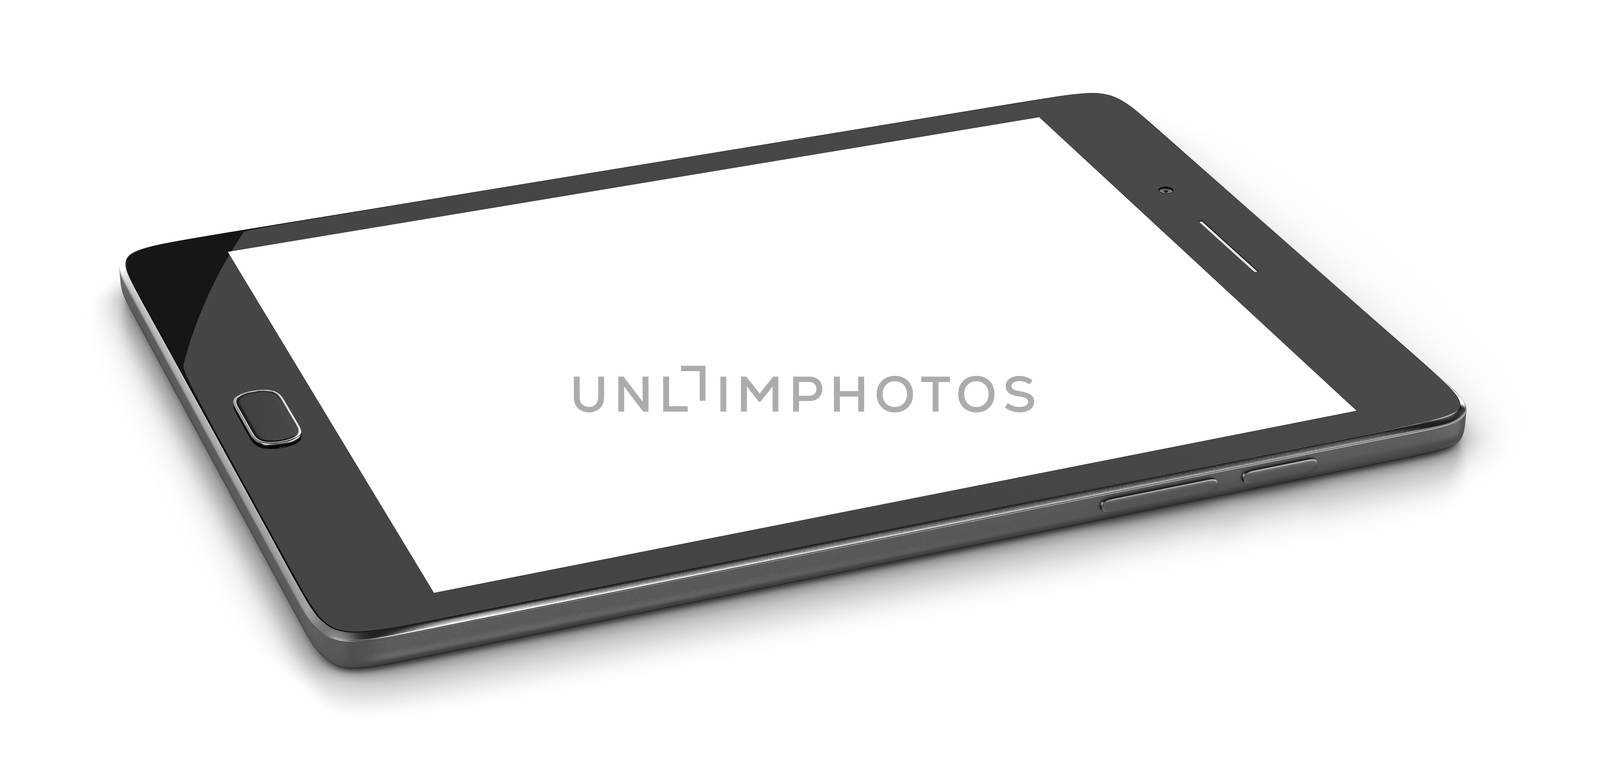 Tablet Pc Turned Off with White Blank Display on White Background 3D Illustration